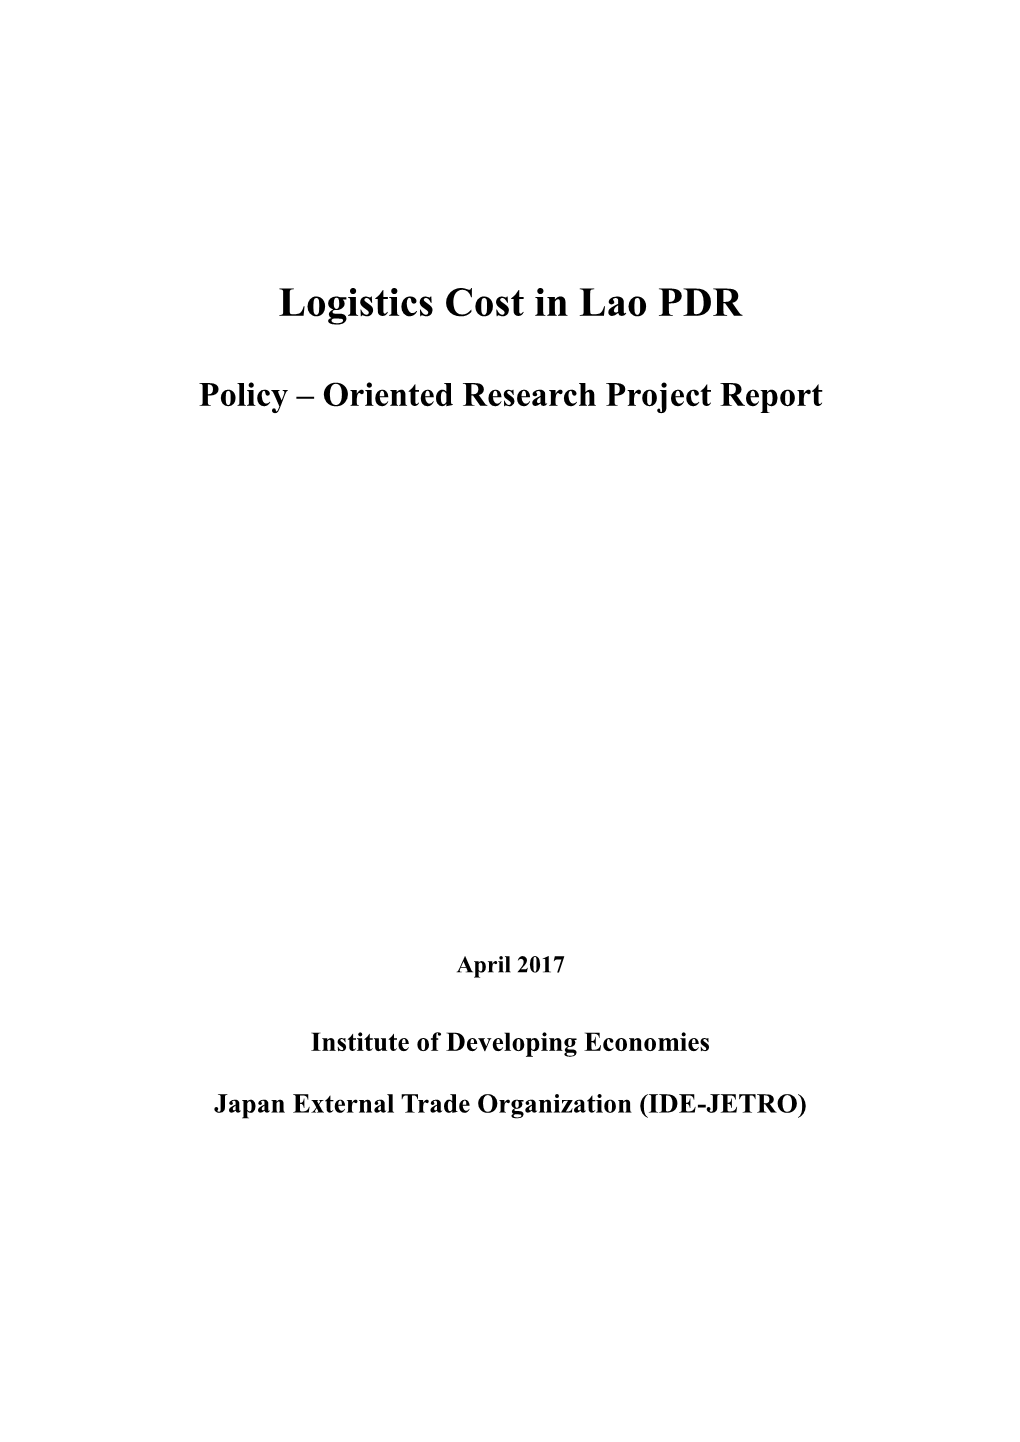 Logistics Cost in Lao PDR, Policy-Oriented Research Project